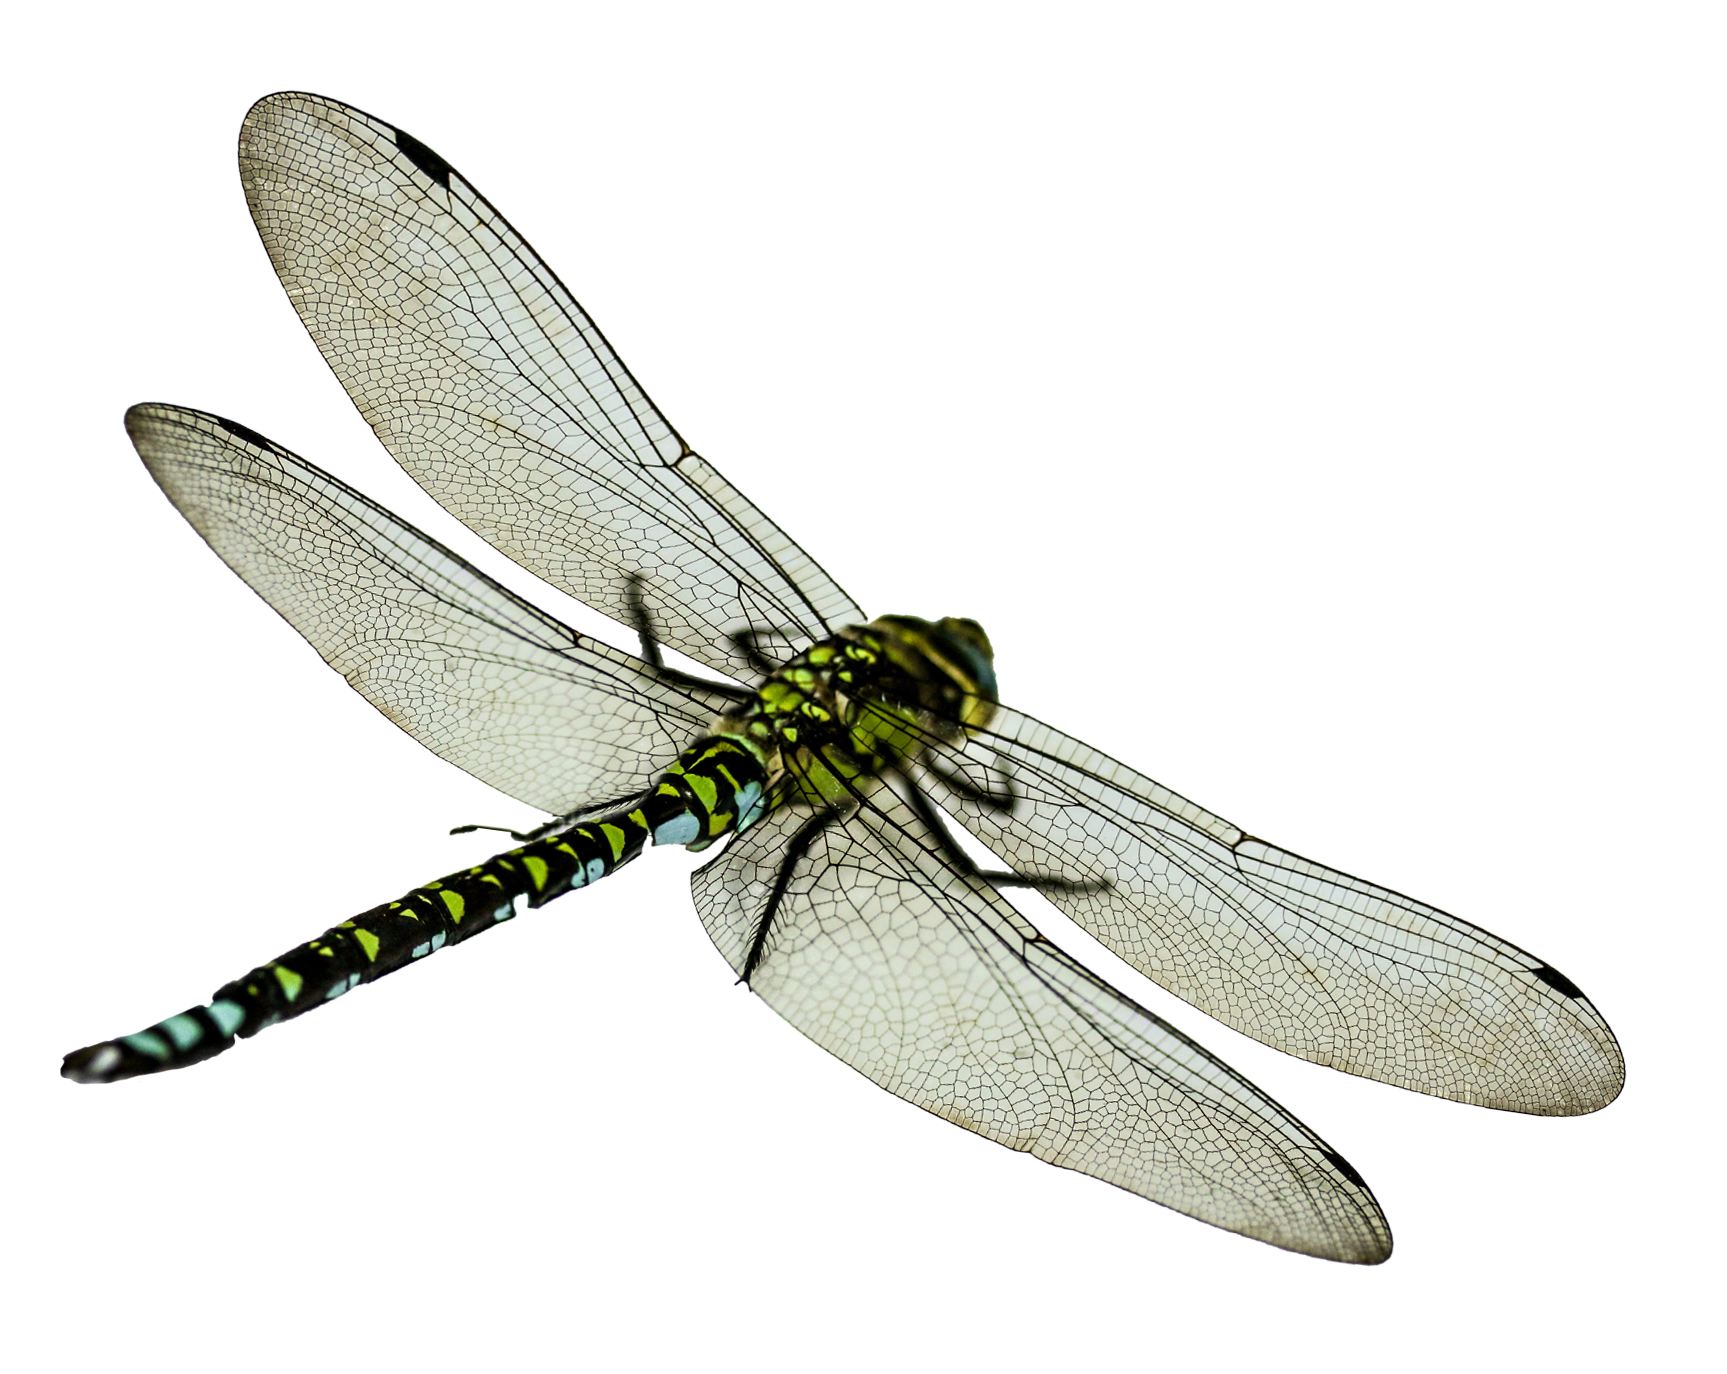 Dragonfly Png Transparent Image - Dragonfly, Transparent background PNG HD thumbnail